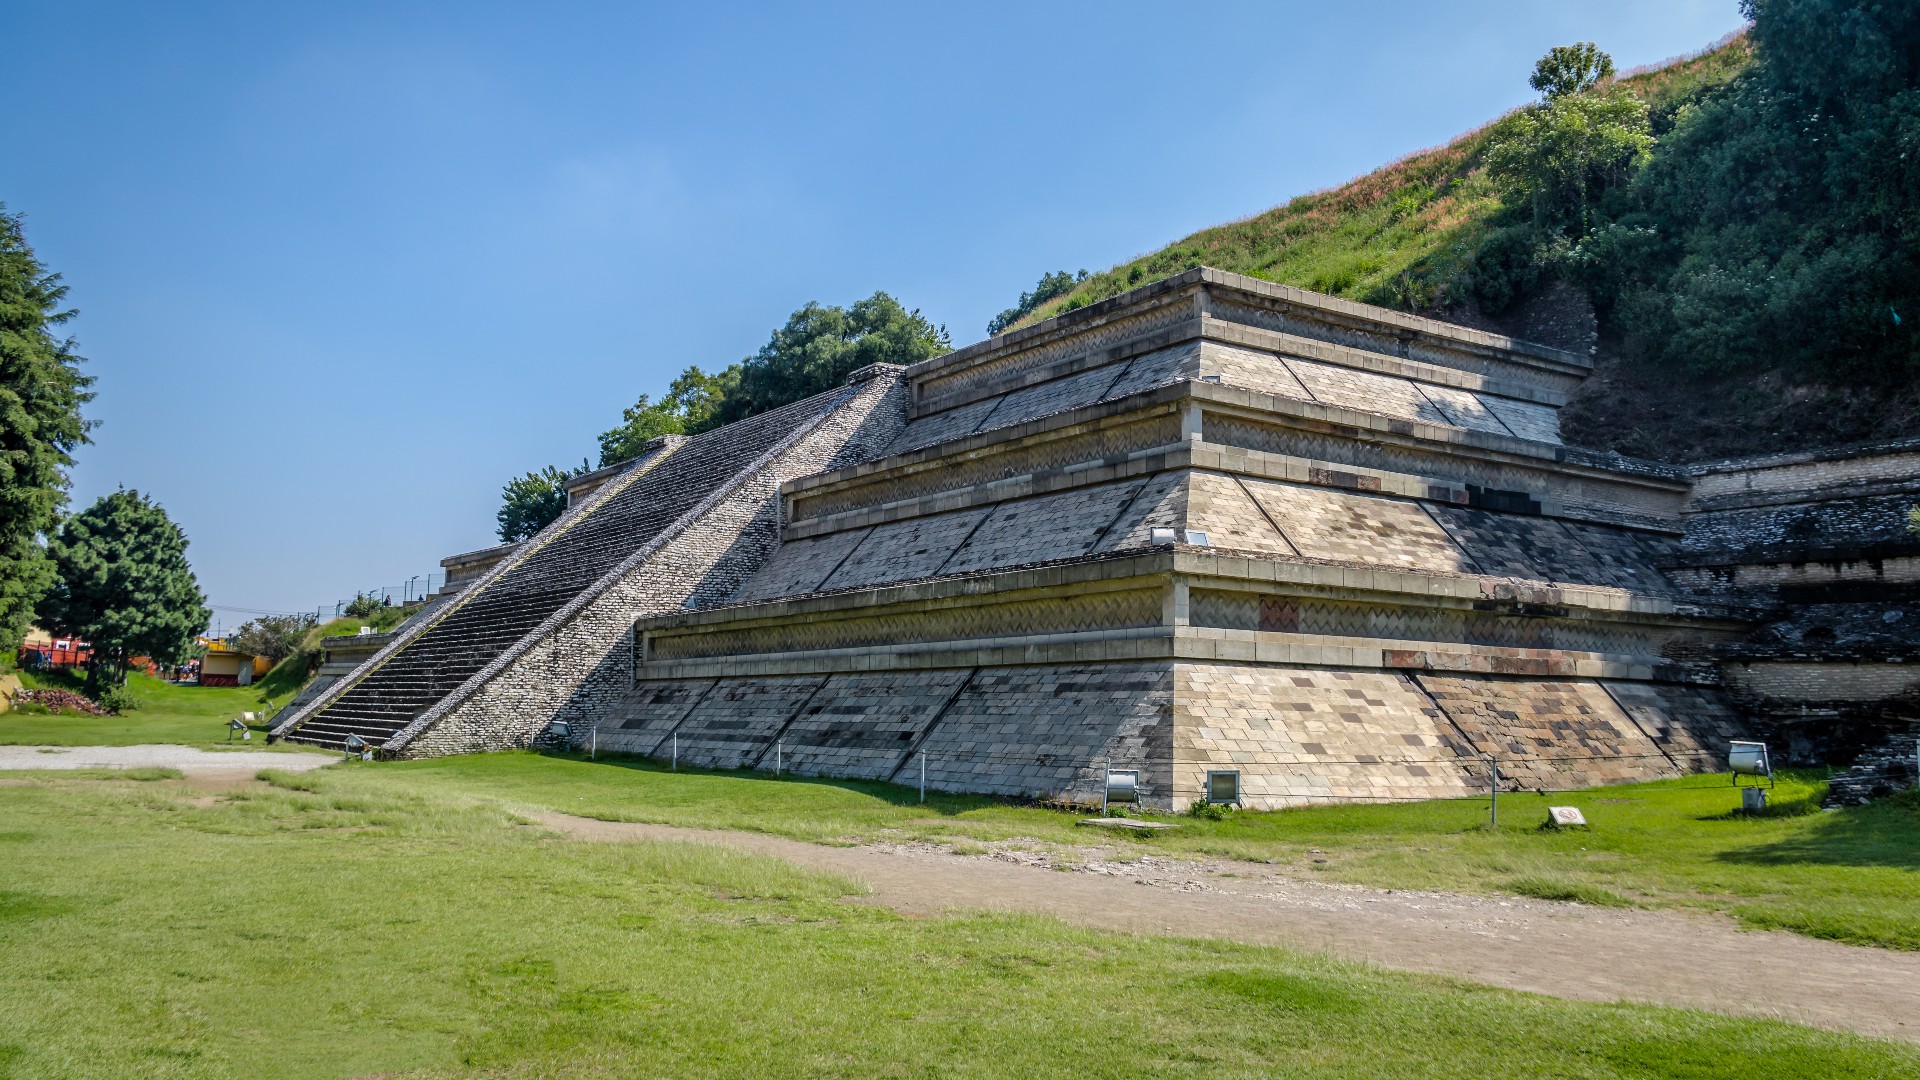 Great Pyramid of Cholula located near the city of Puebla in Mexico.